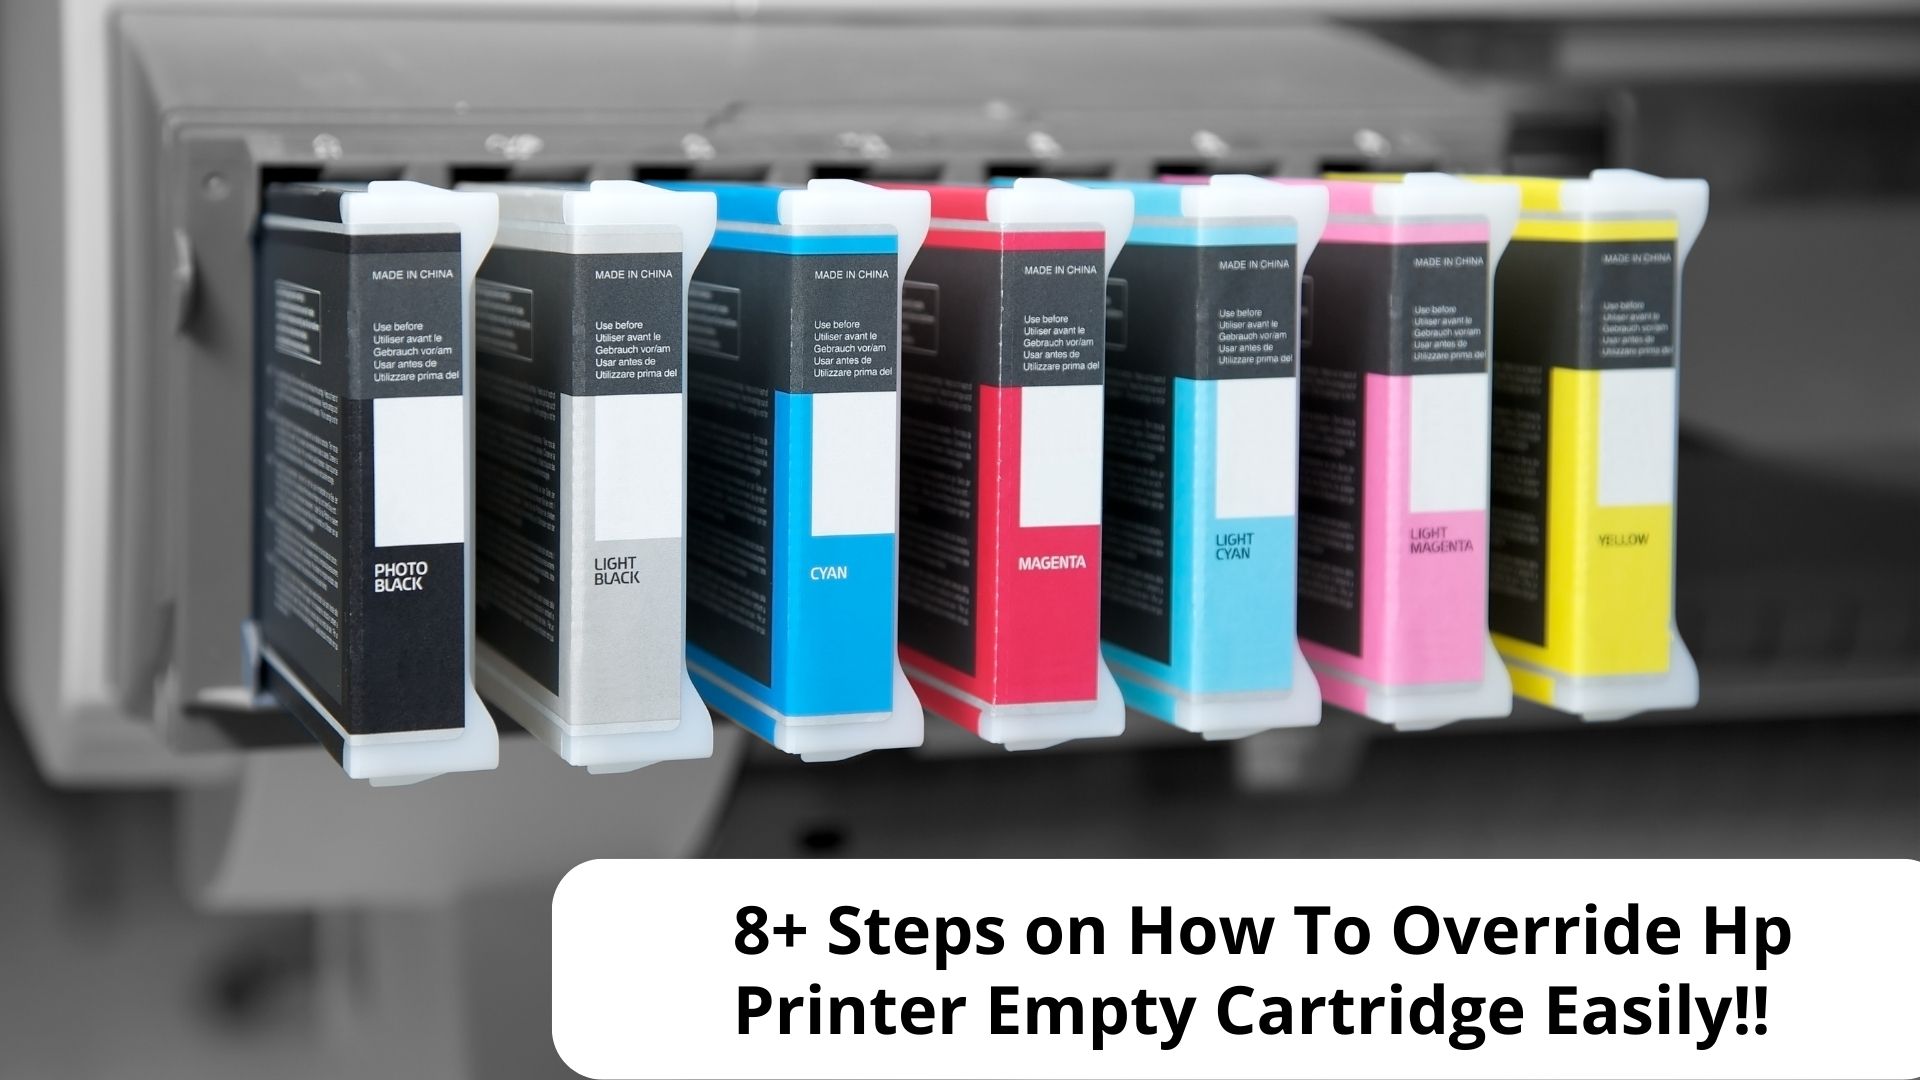 8+ Steps on How To Override HP Printer Empty Cartridge Easily!!